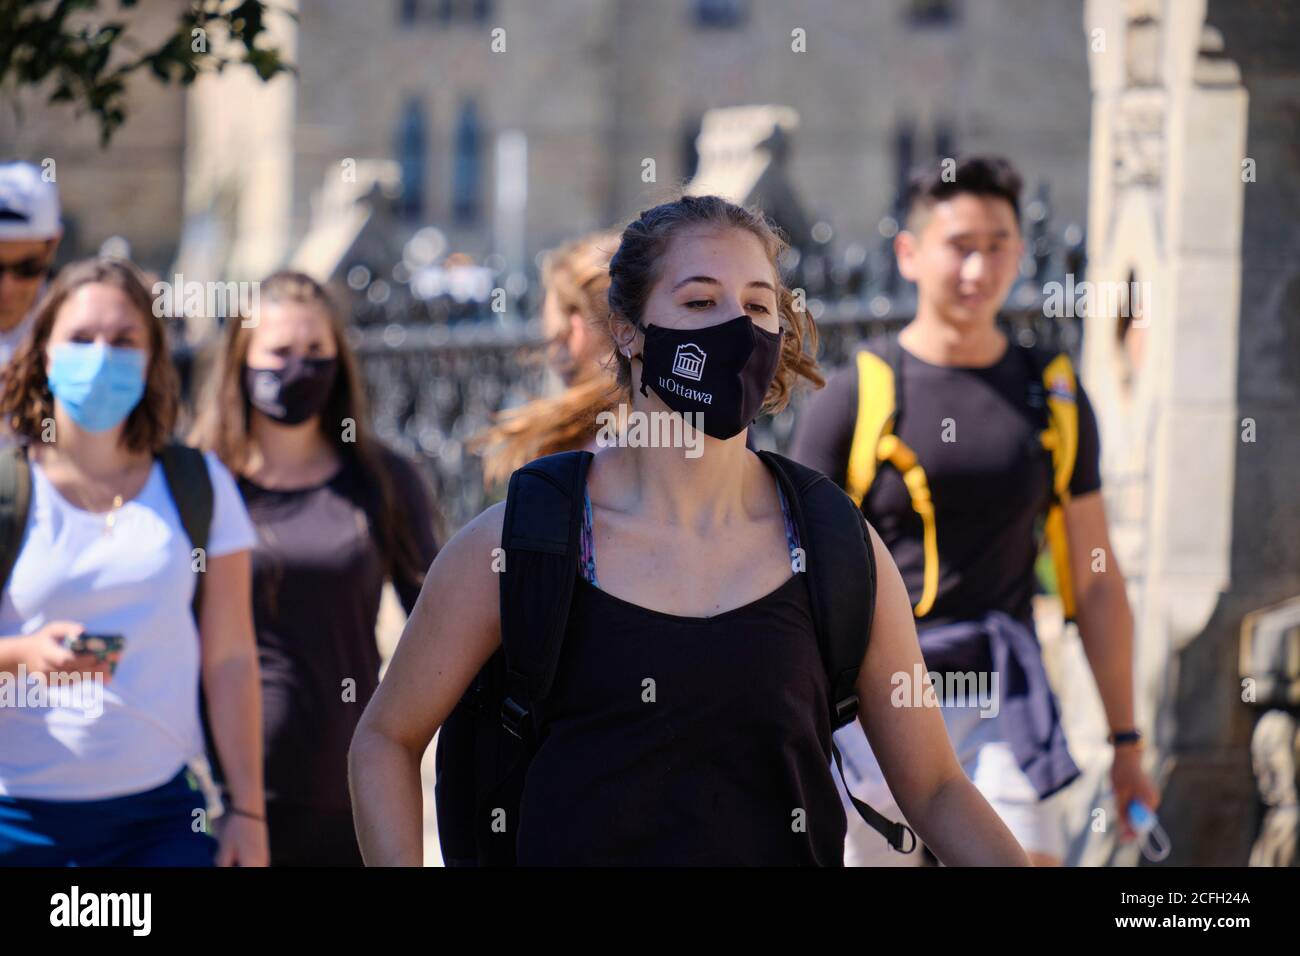 University of Ottawa students on an adventure race around the Capital as New year starts. Student with university branded mask running to next challen Stock Photo